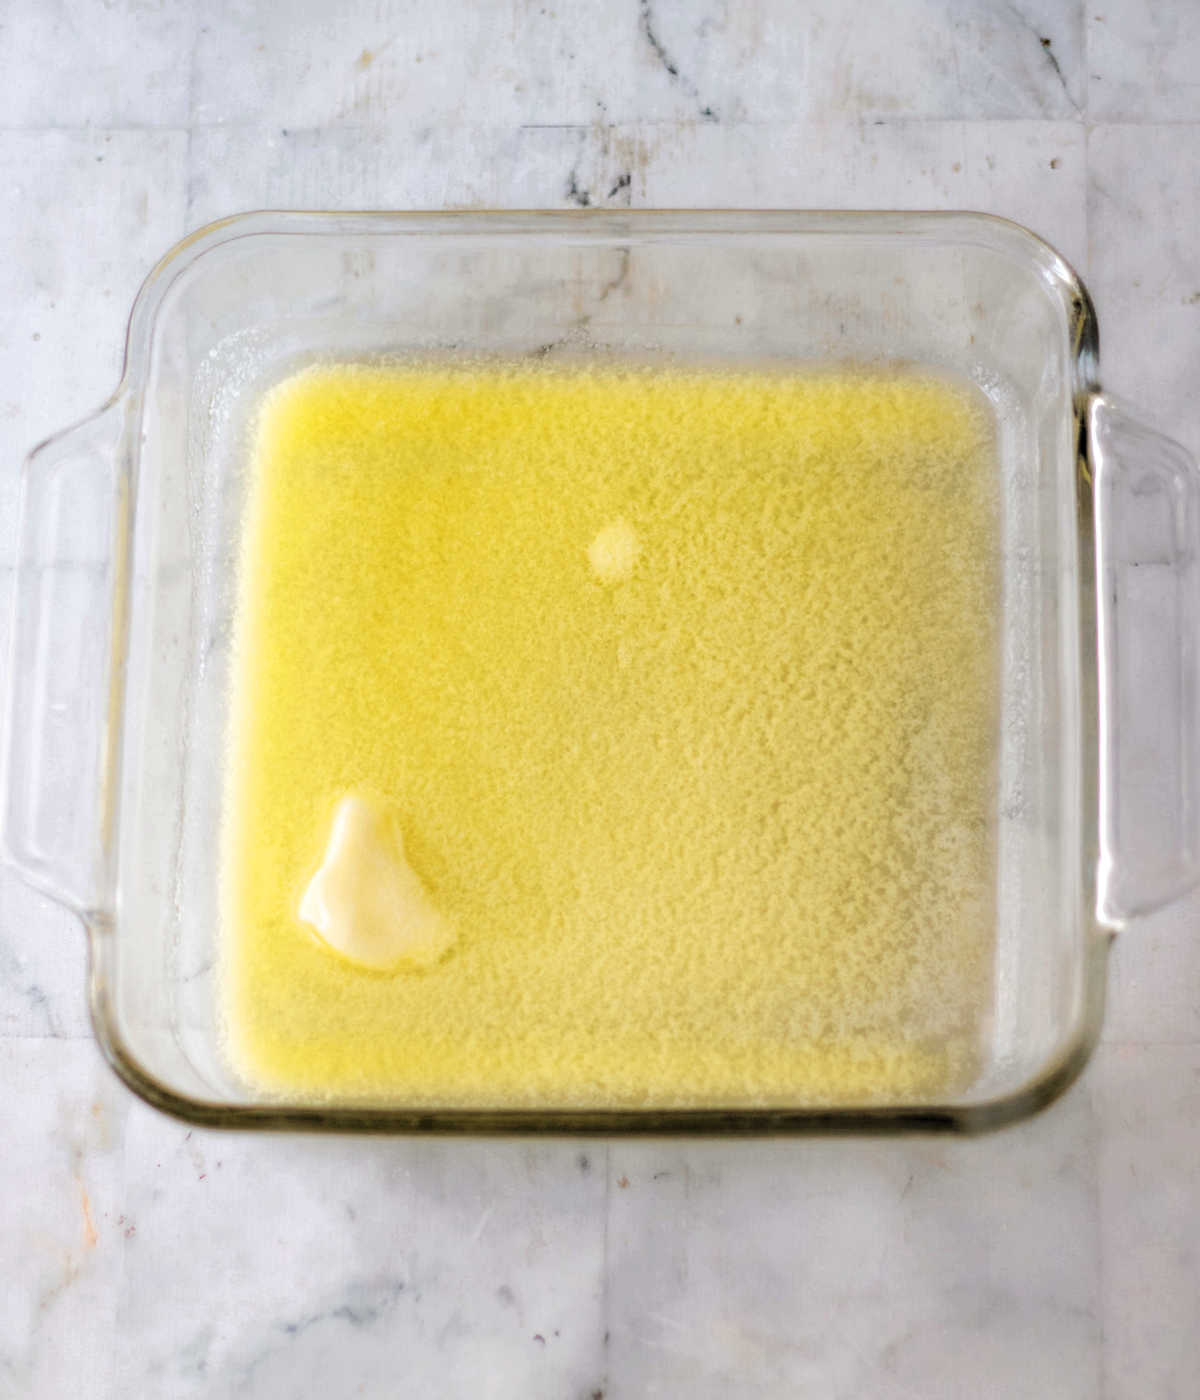 Square baking dish with melted butter inside.